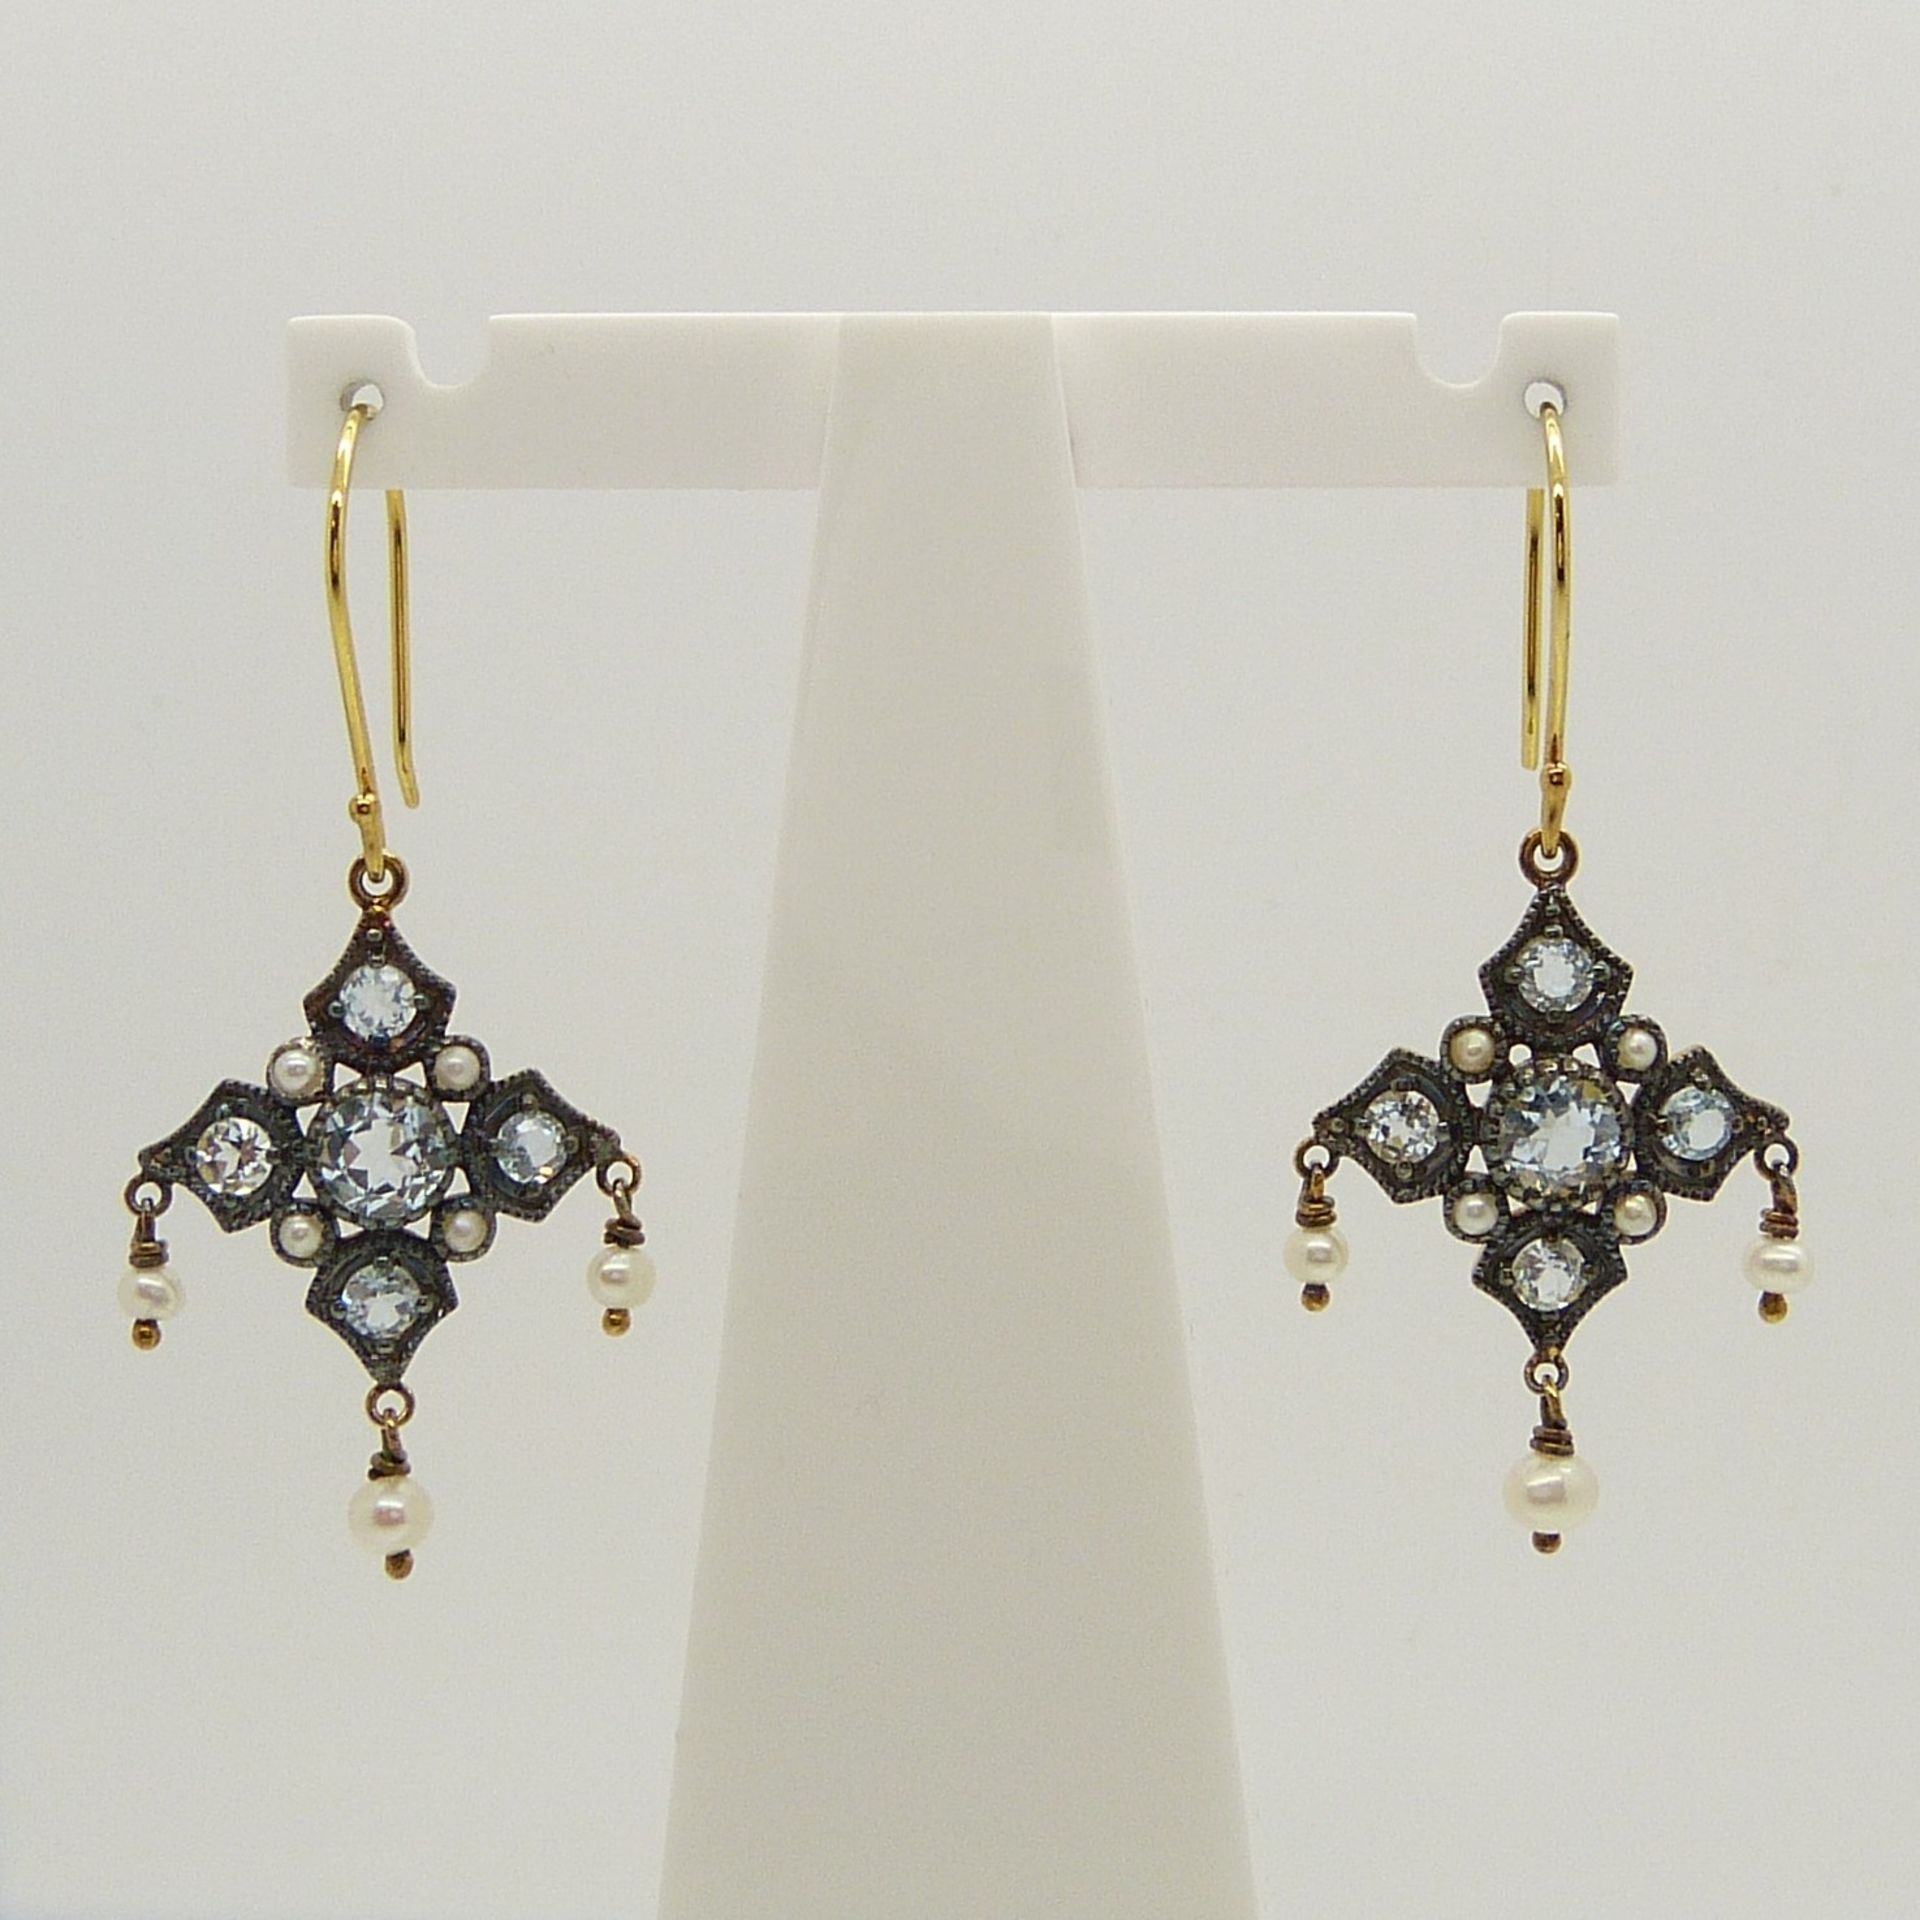 Drop earrings set with blue topaz, pearls and seed pearls in an Edwardian style, with stylish box - Image 3 of 5